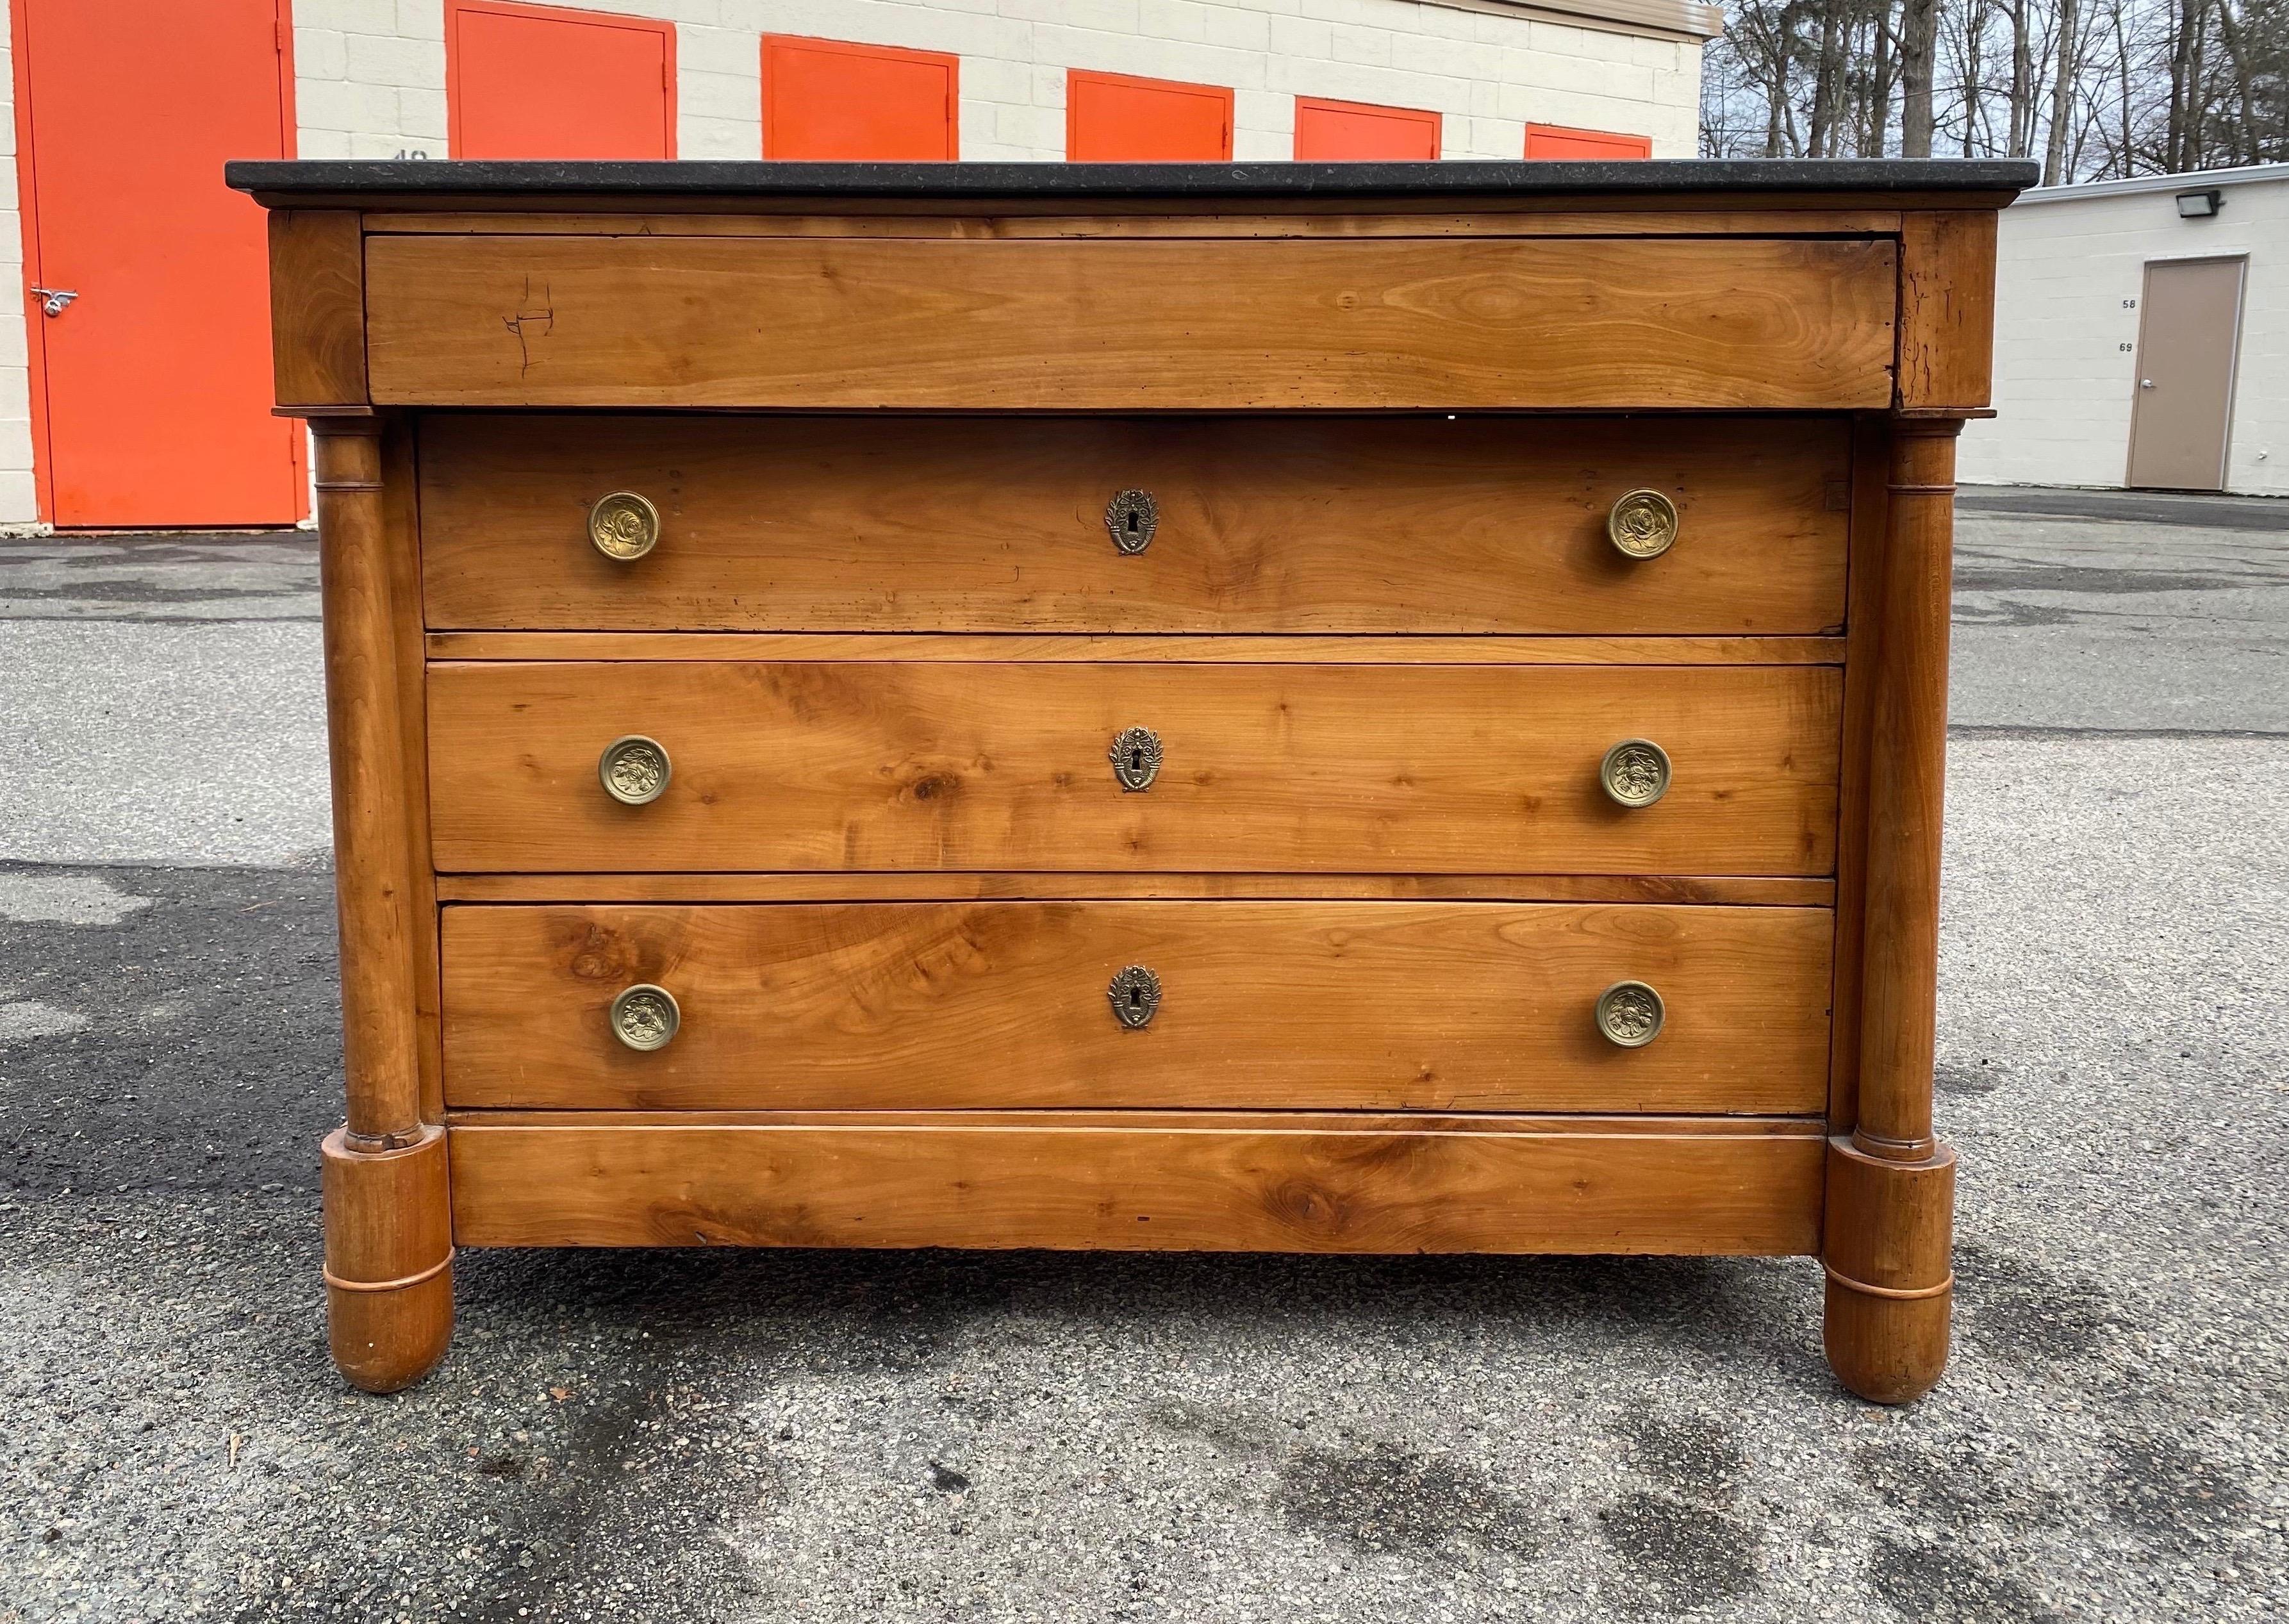 Gorgeous color on this 19th century French Empire four drawer marble top cherry commode.